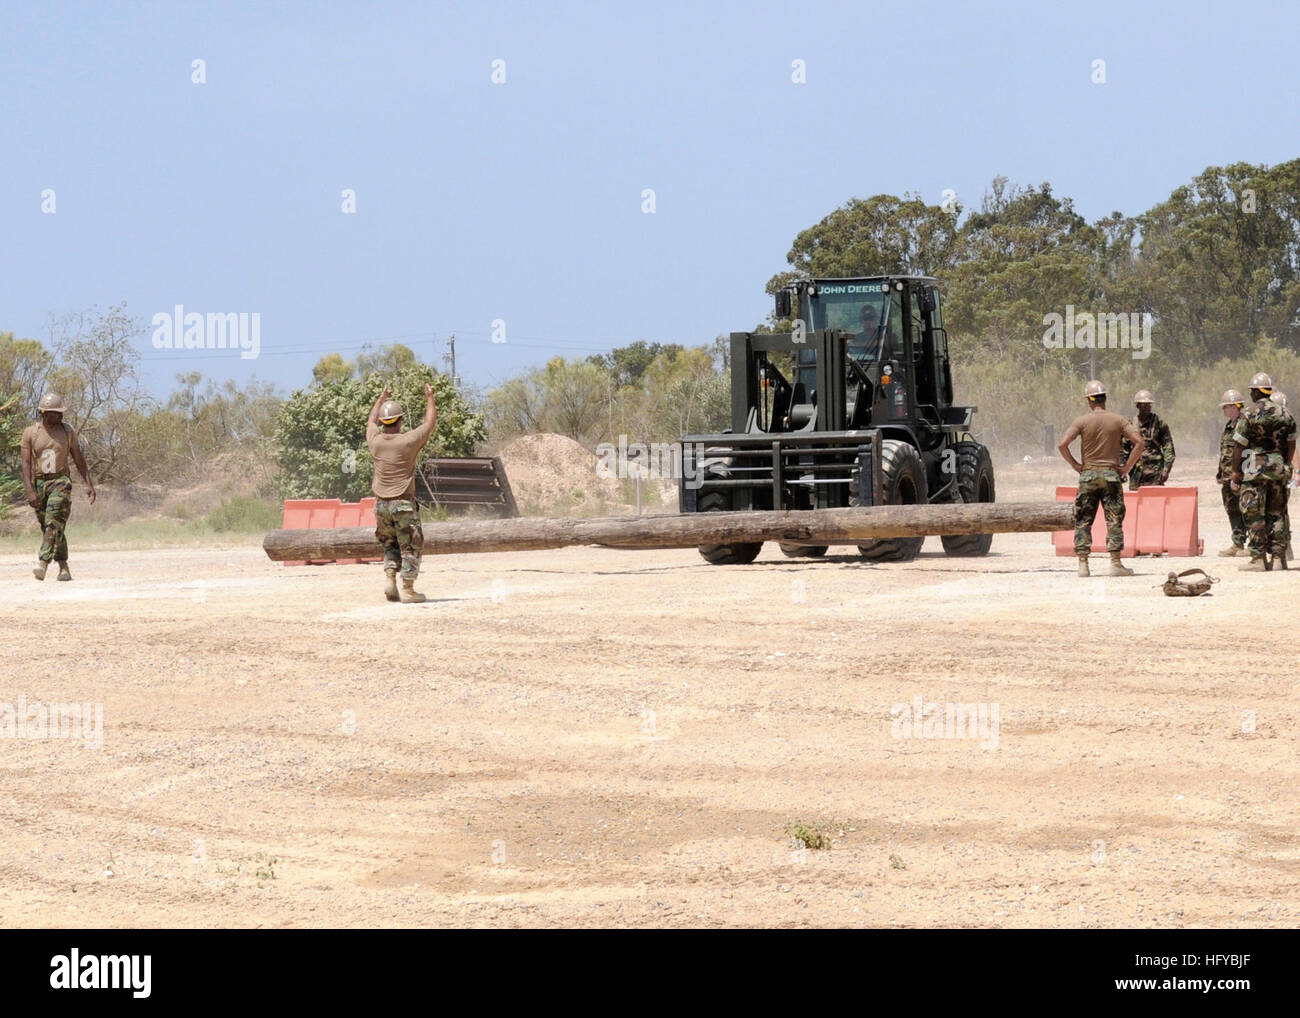 100807-N-6357K-011 ROTA, Spain (Aug. 7, 2010) Seabees assigned to Naval Mobile Construction Battalion (NMCB) 7 conduct John Deer 12K forklift handling proficiency training during a training exercise at Camp Mitchell at Naval Base Rota, Spain. NMCB-7 and its detachments are deployed to the U.S. 6th Fleet area of responsibility to provide construction and engineering support. (U.S. Navy photo by Chief Mass Communication Specialist Yan Kennon/Released) US Navy 100807-N-6357K-011 Seabees conduct John Deer 12K forklift handling proficiency training during a training exercise at Camp Mitchell at Nav Stock Photo